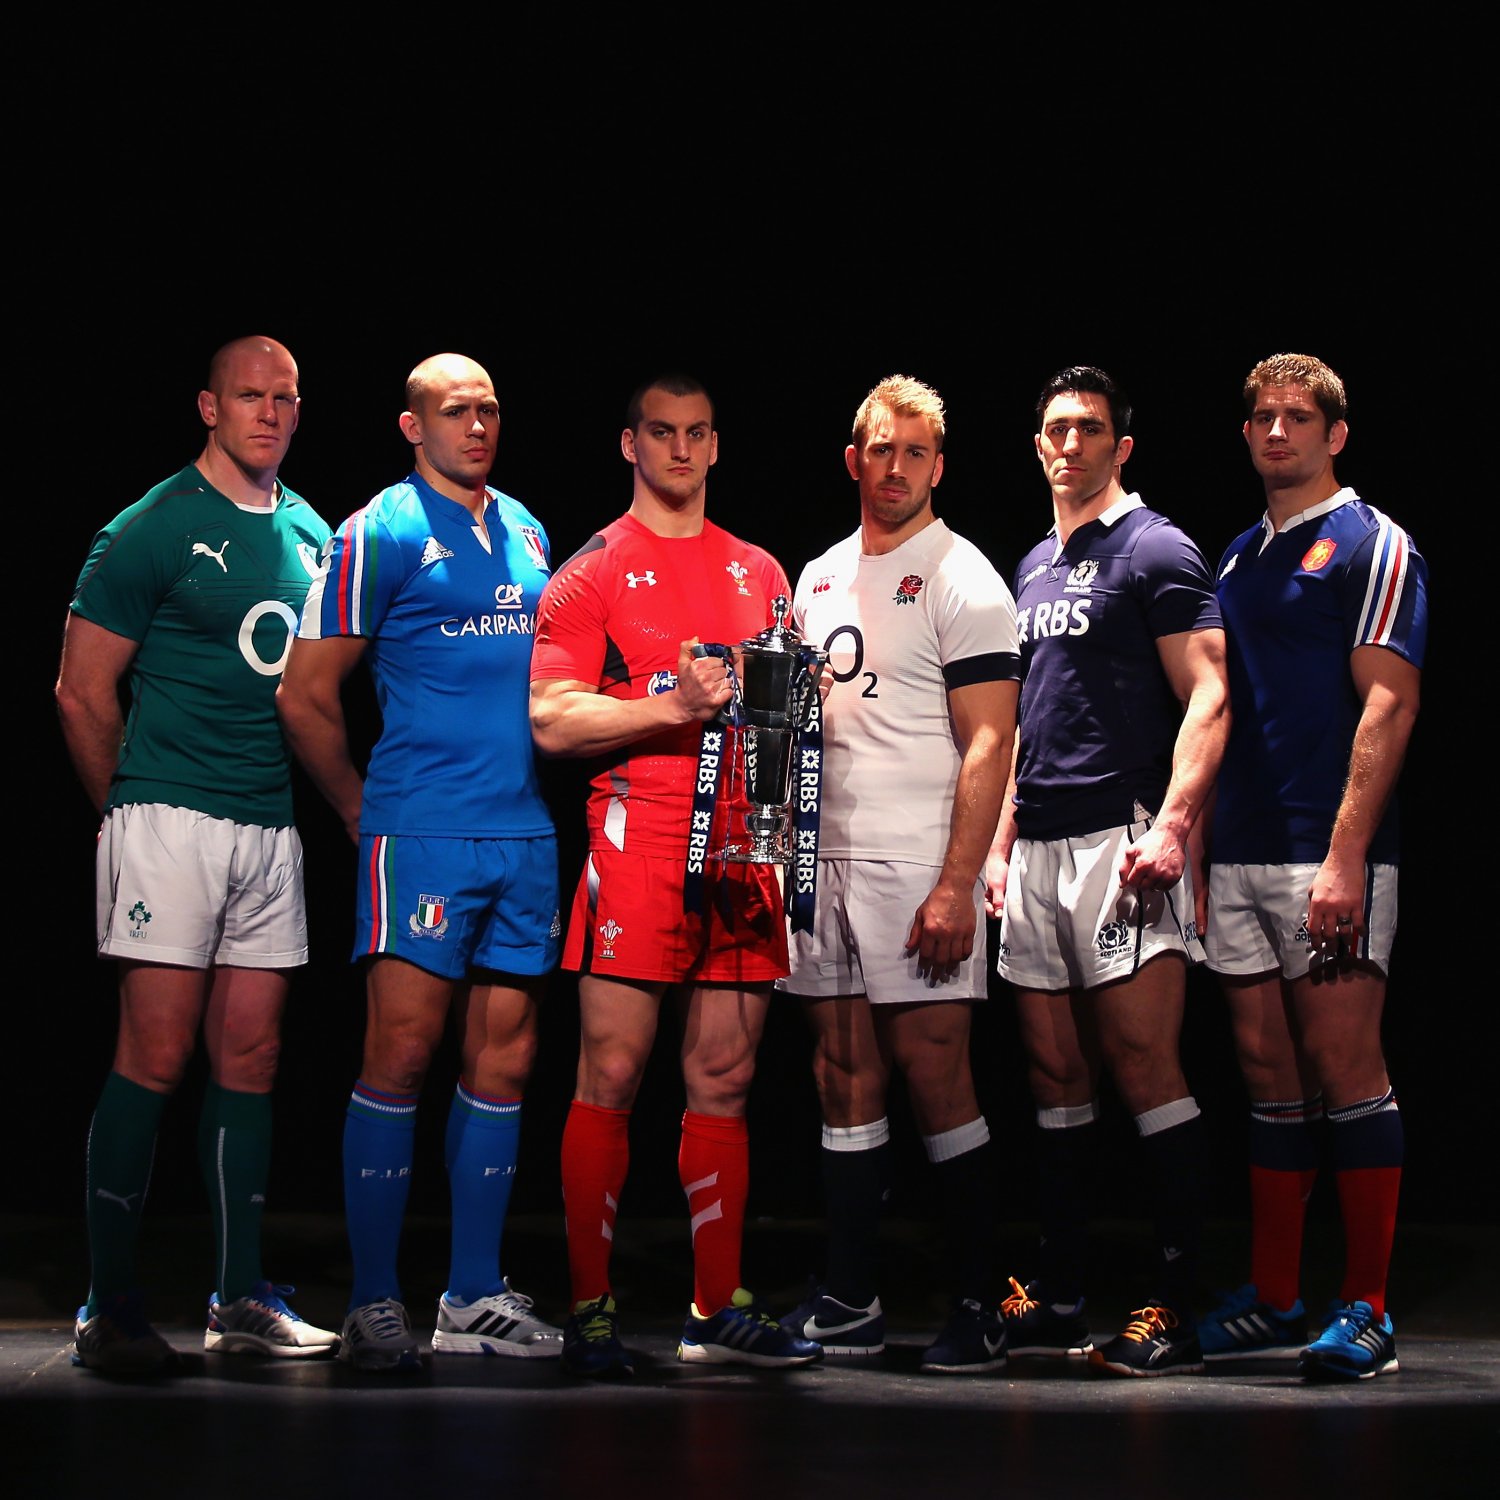 Wales 6 Nations Games 2014